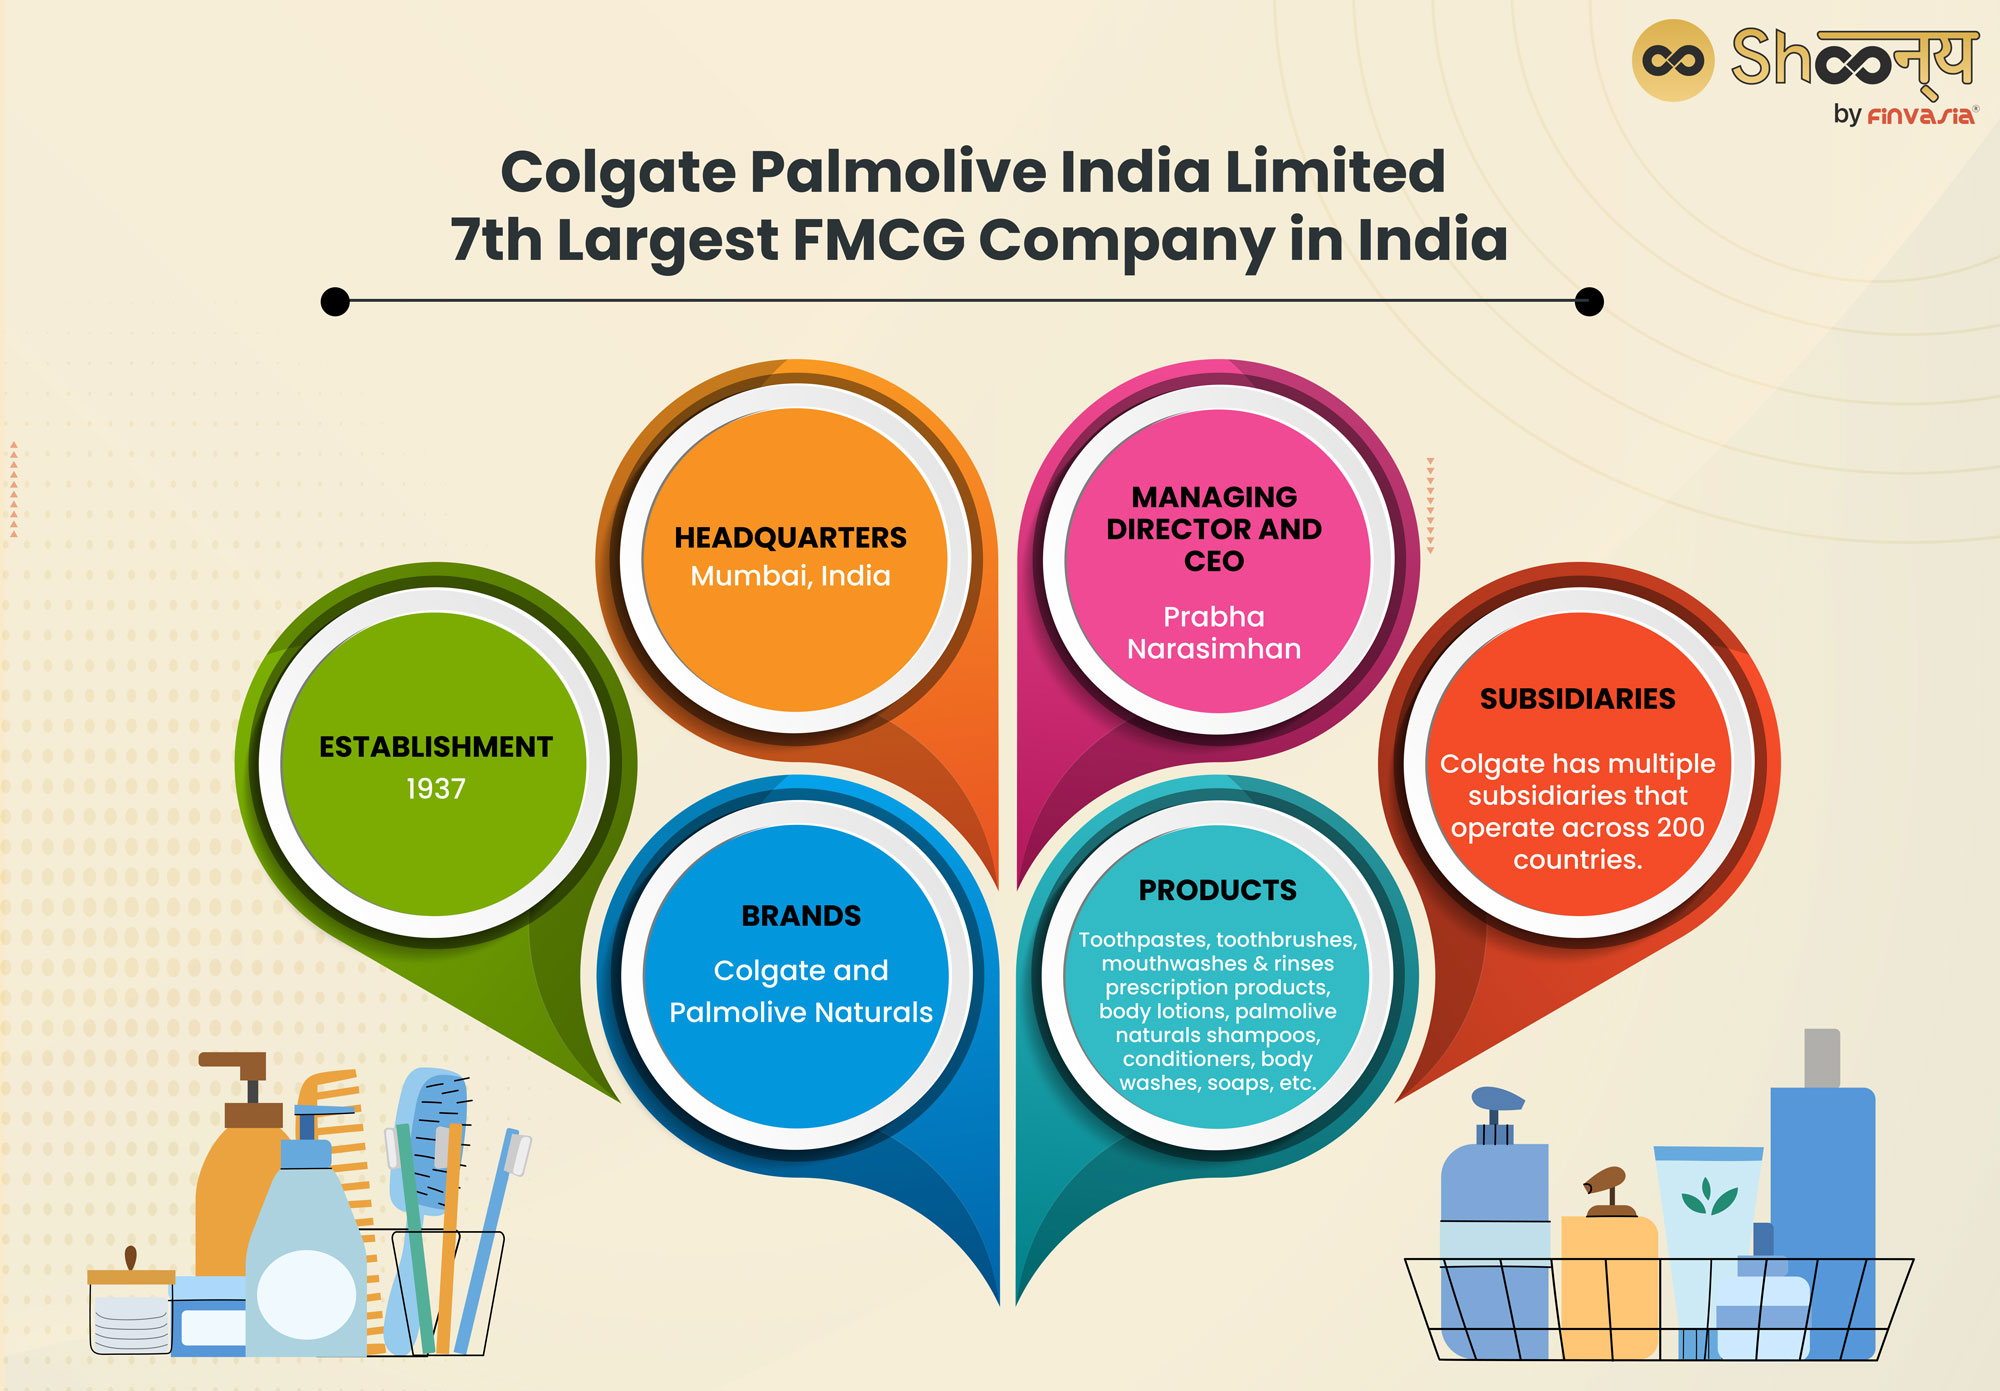 Colgate Palmolive India Limited - 7th Largest FMCG Company in India